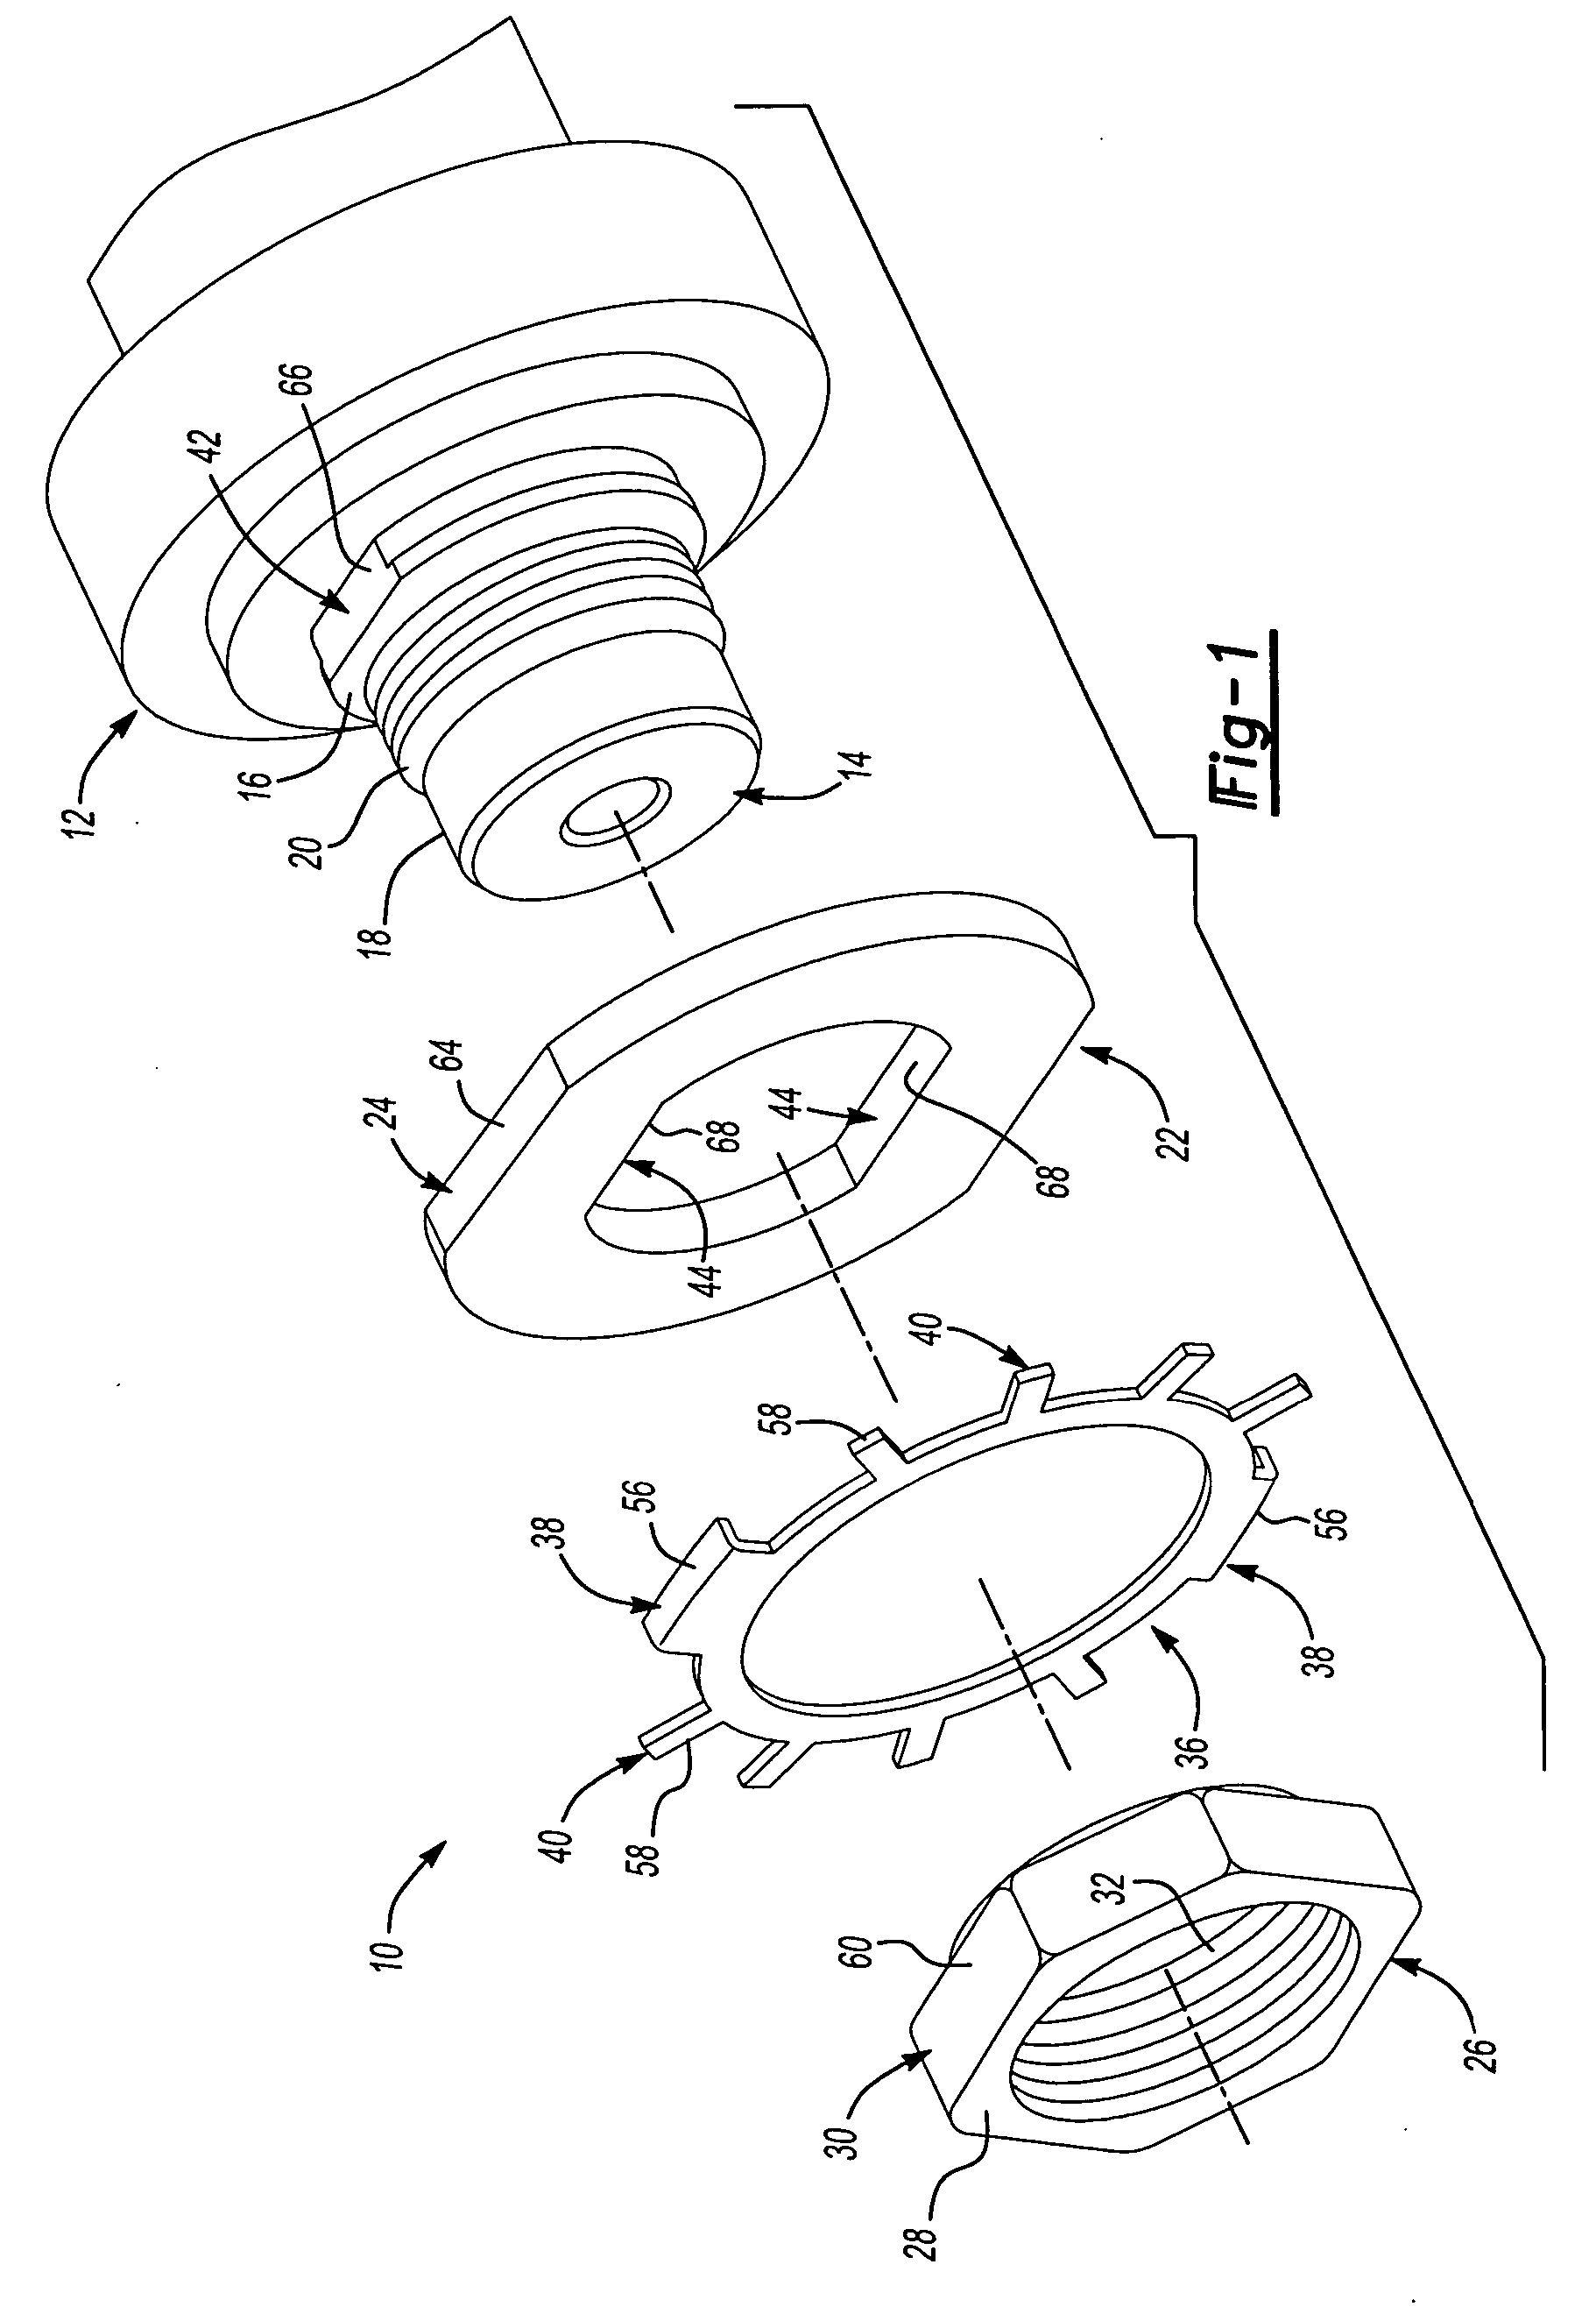 Combination lock washer and spindle bearing assembly